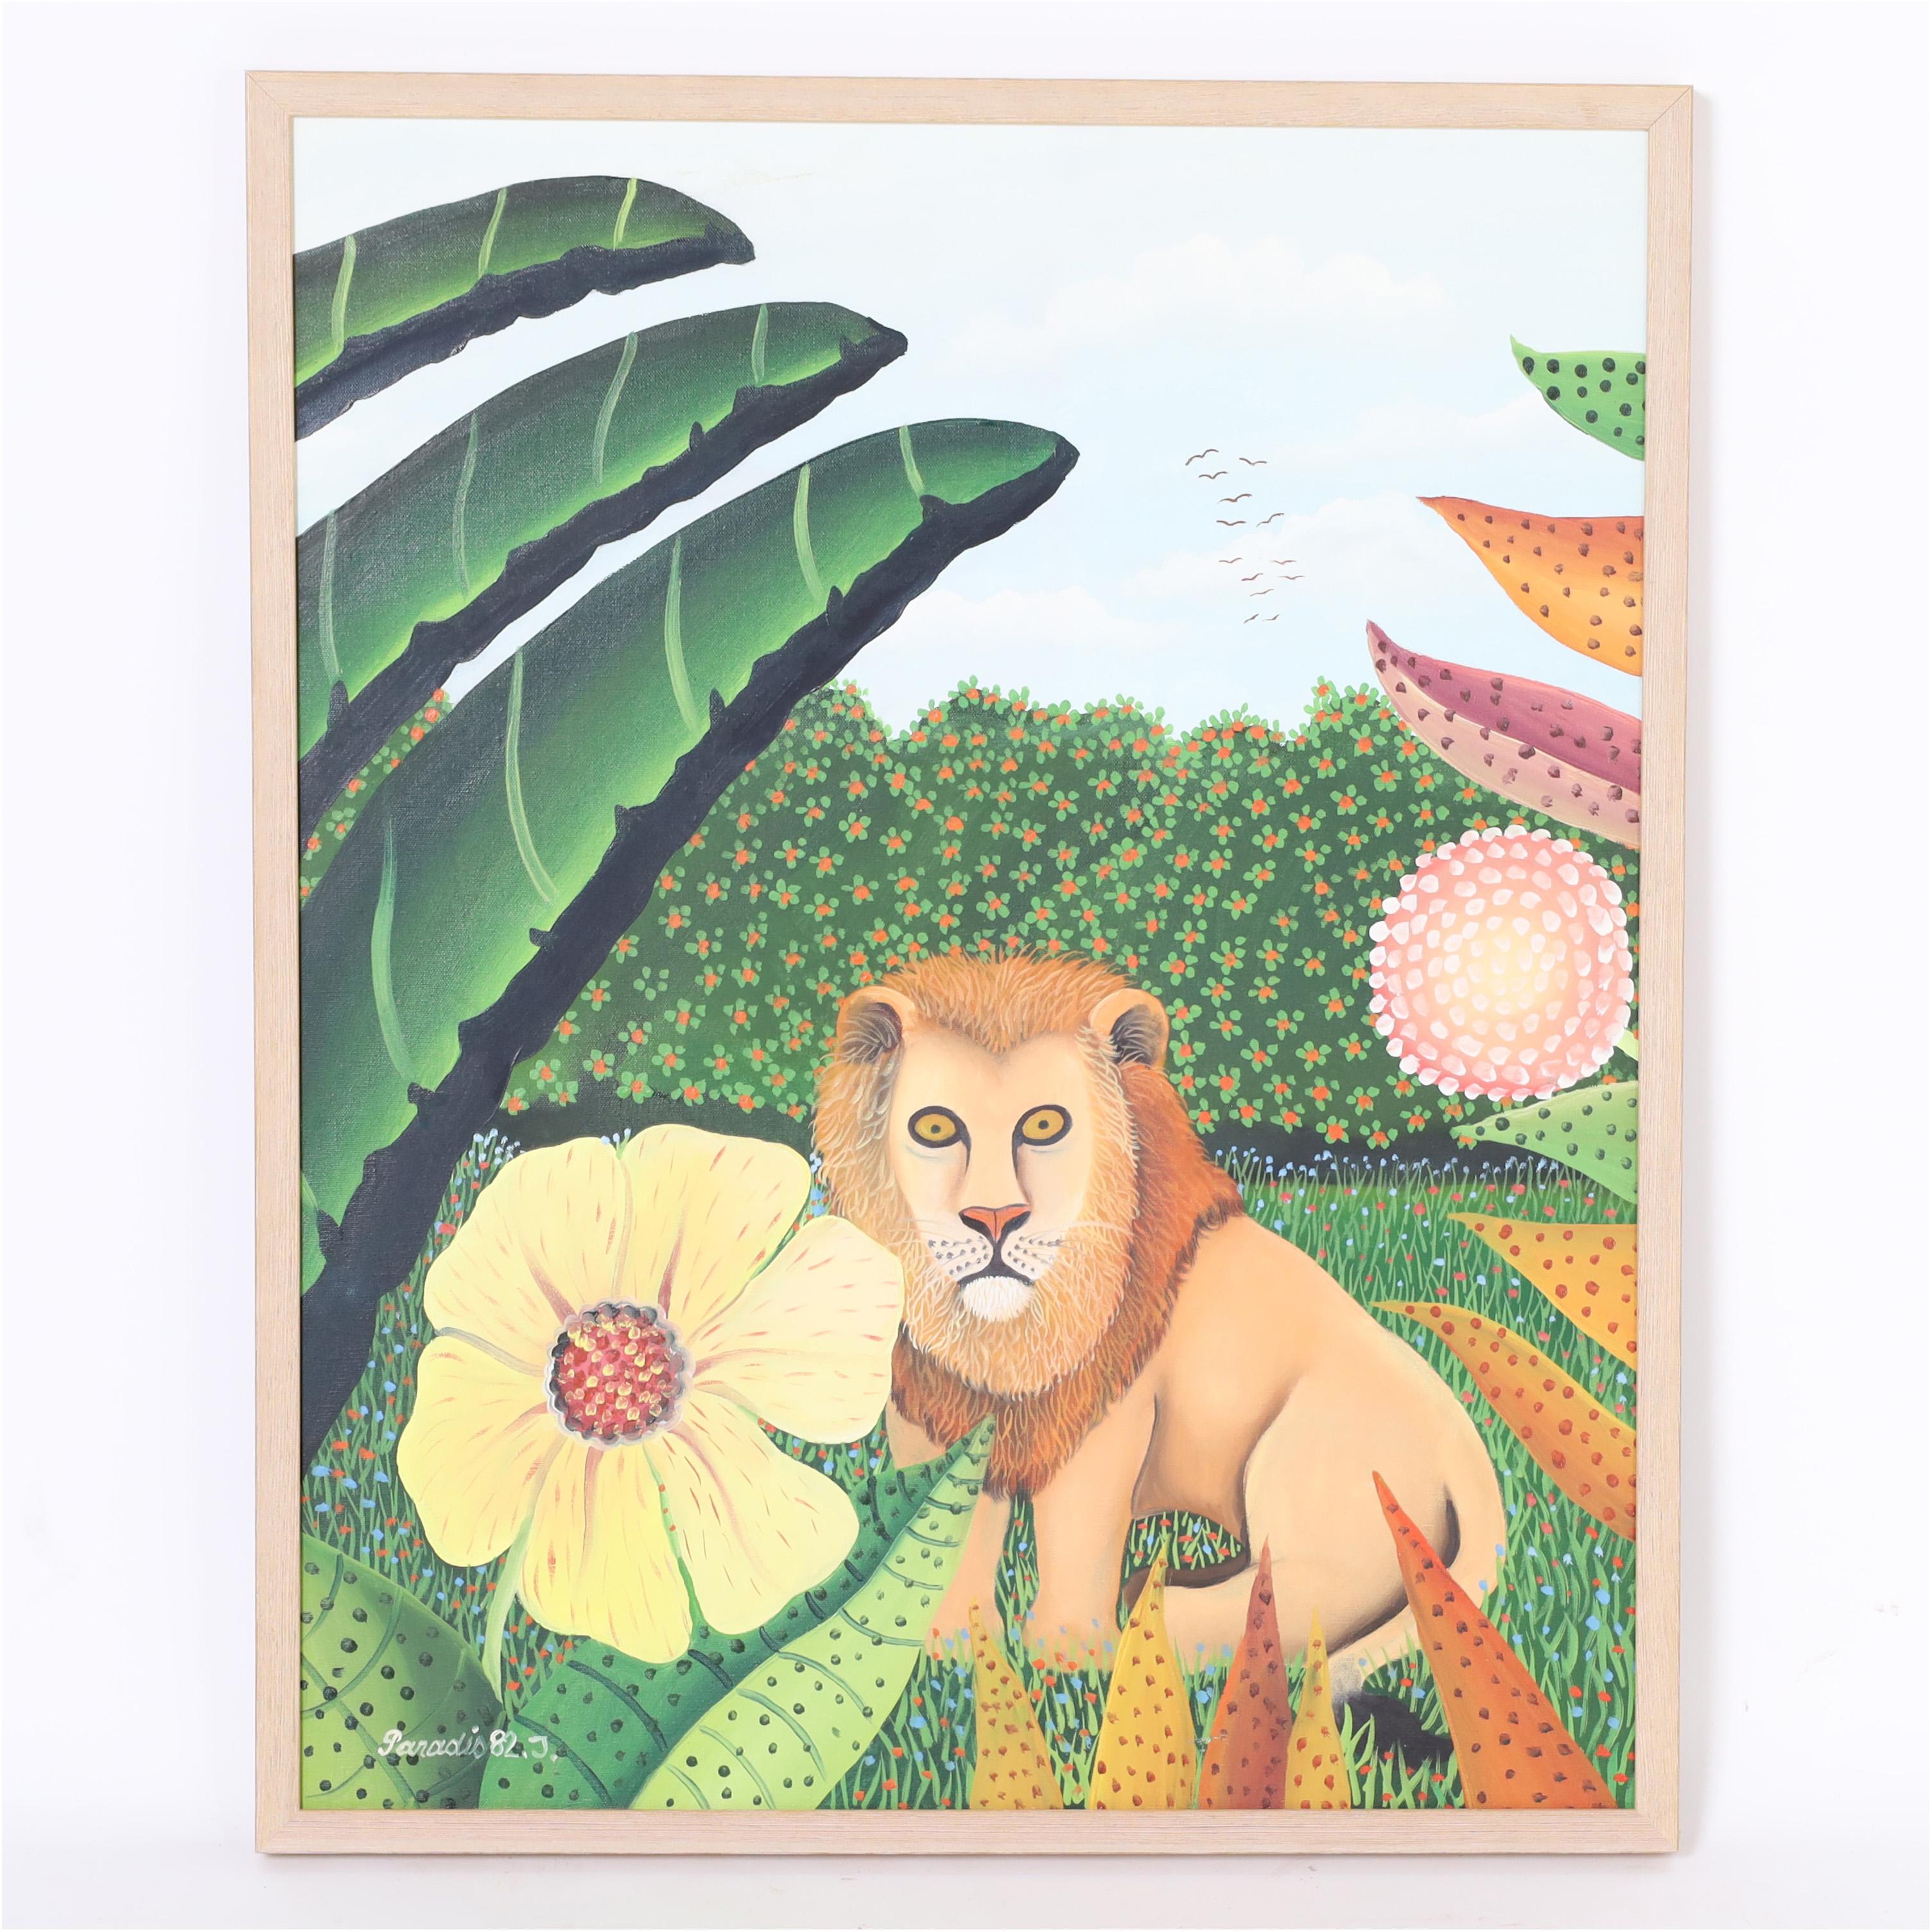 Enchanting acrylic painting on canvas of a lion in a fantasy jungle setting executed in a charming naive style. Signed Paradis 82 in the lower left and presented in a wood frame.